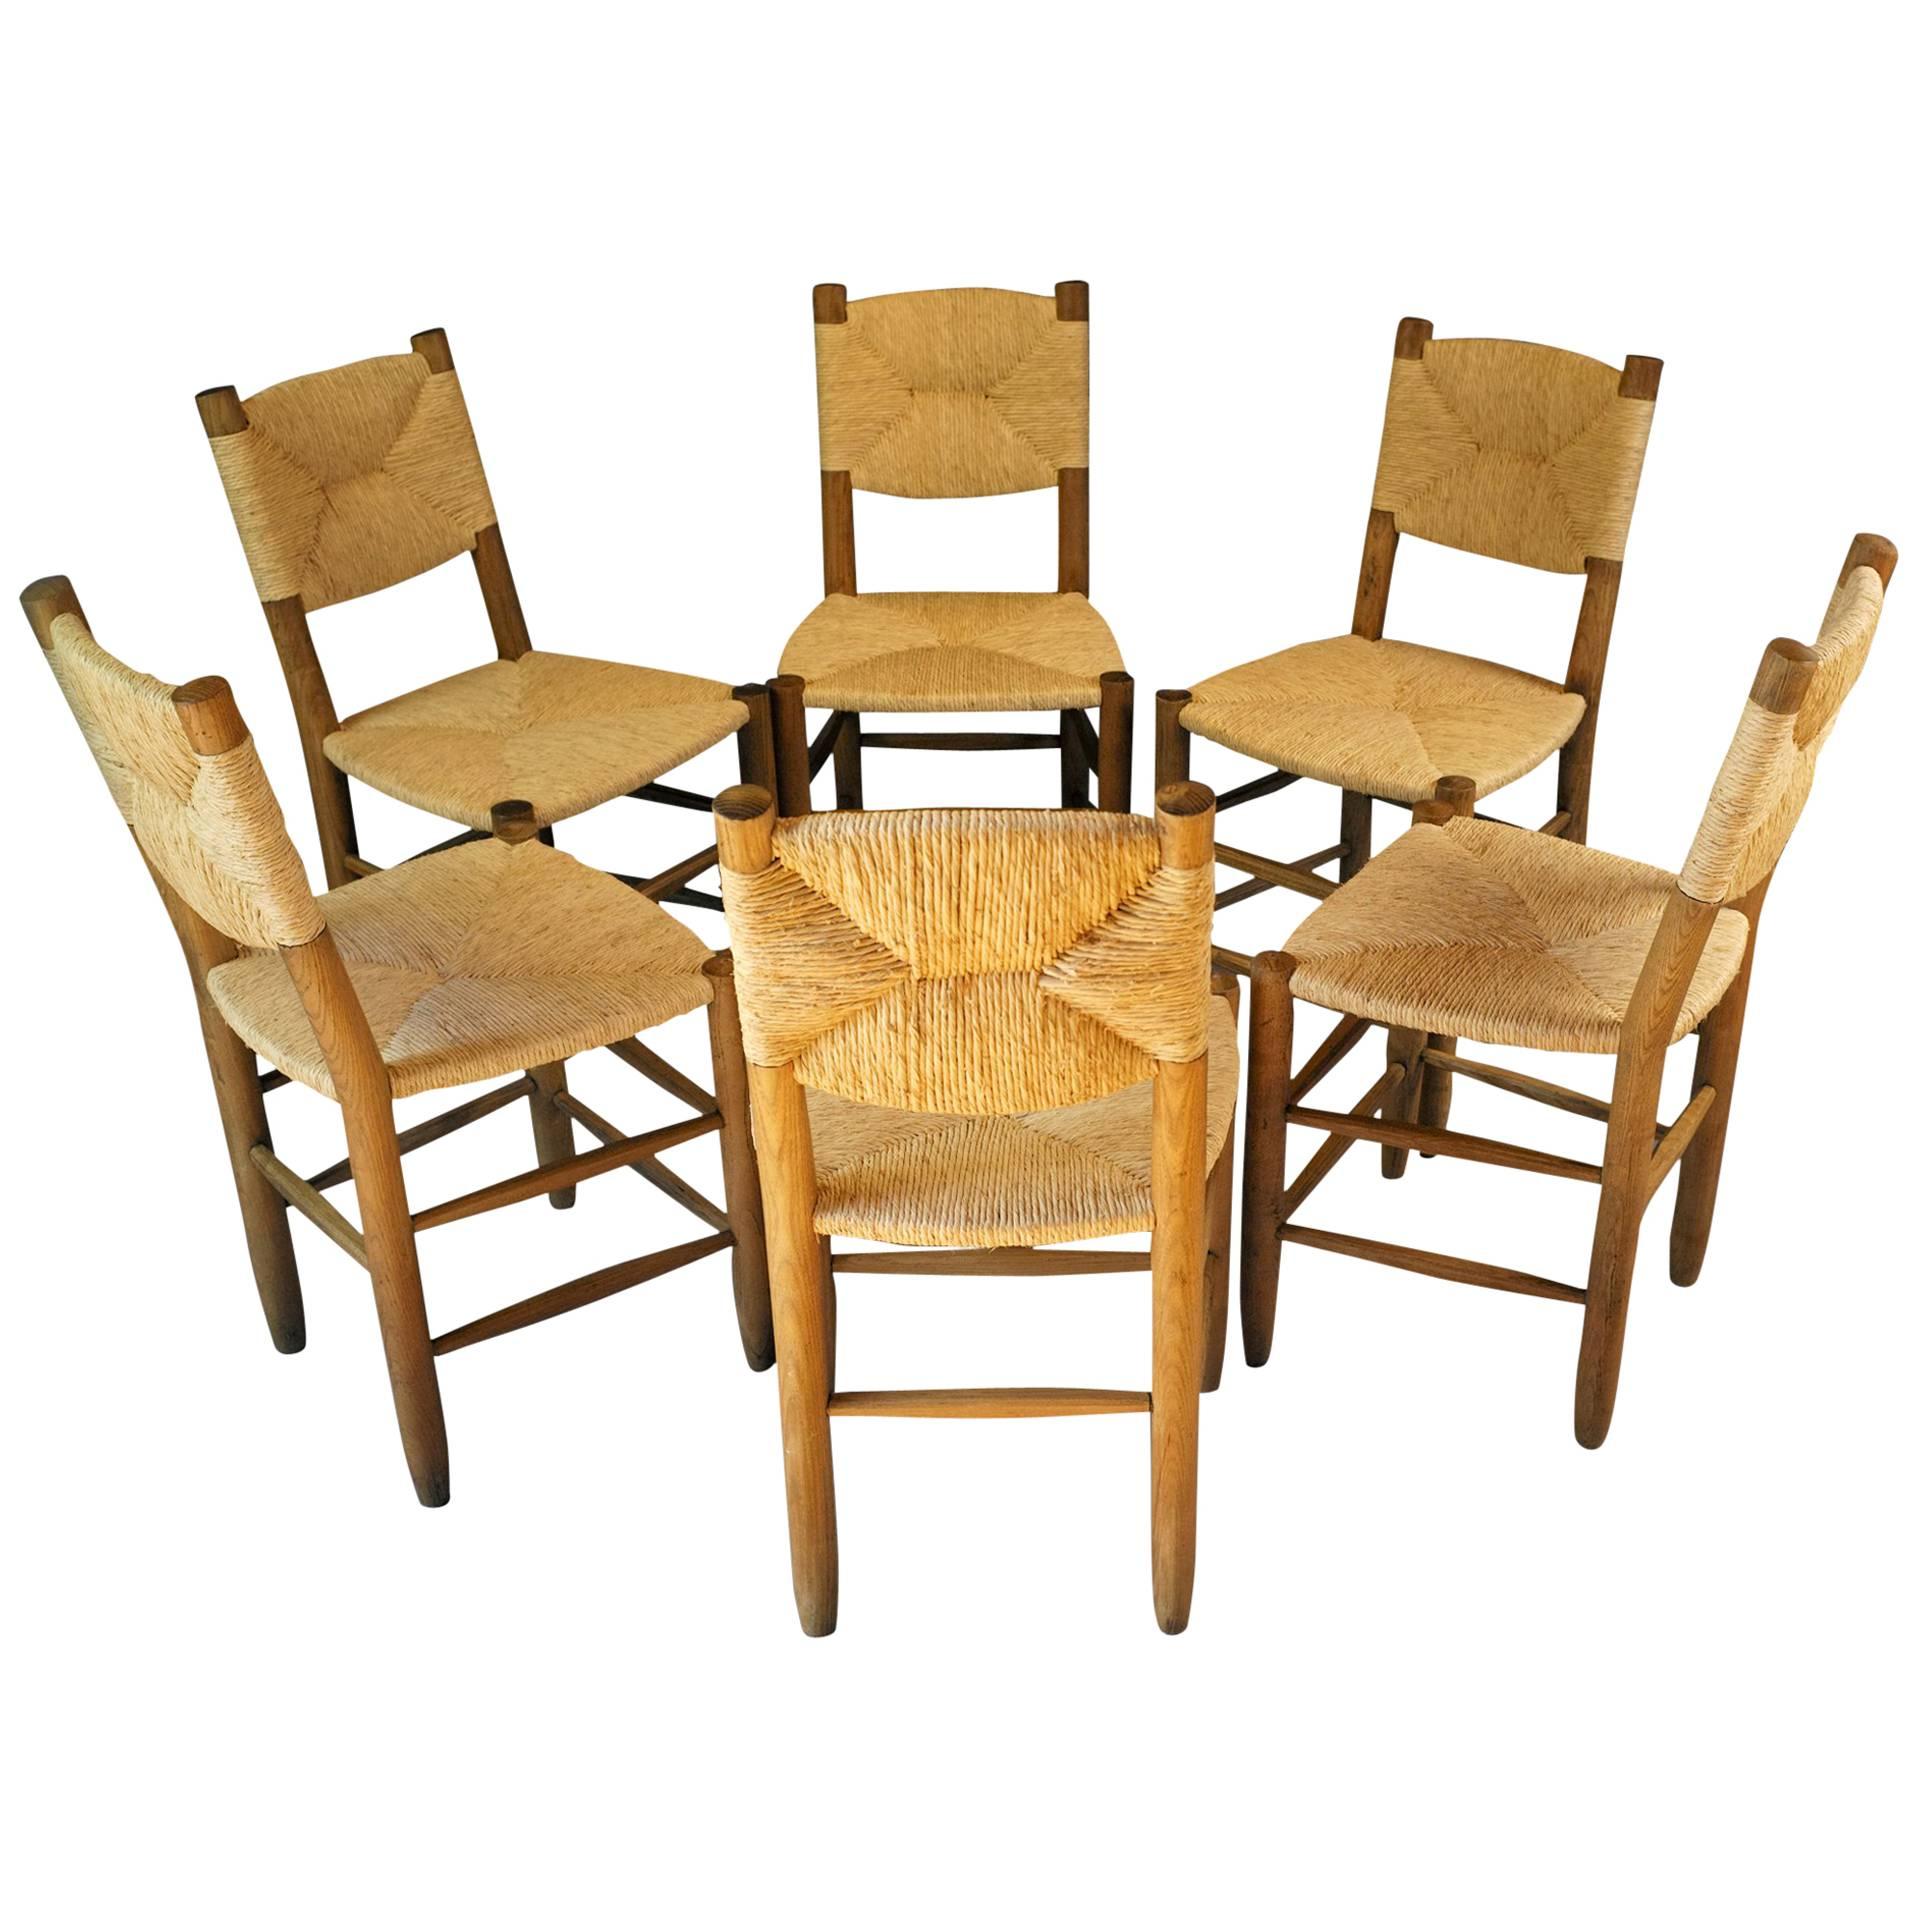 Bauche No. 19 Chairs by Charlotte Perriand for BCB, 1951, Set of Six